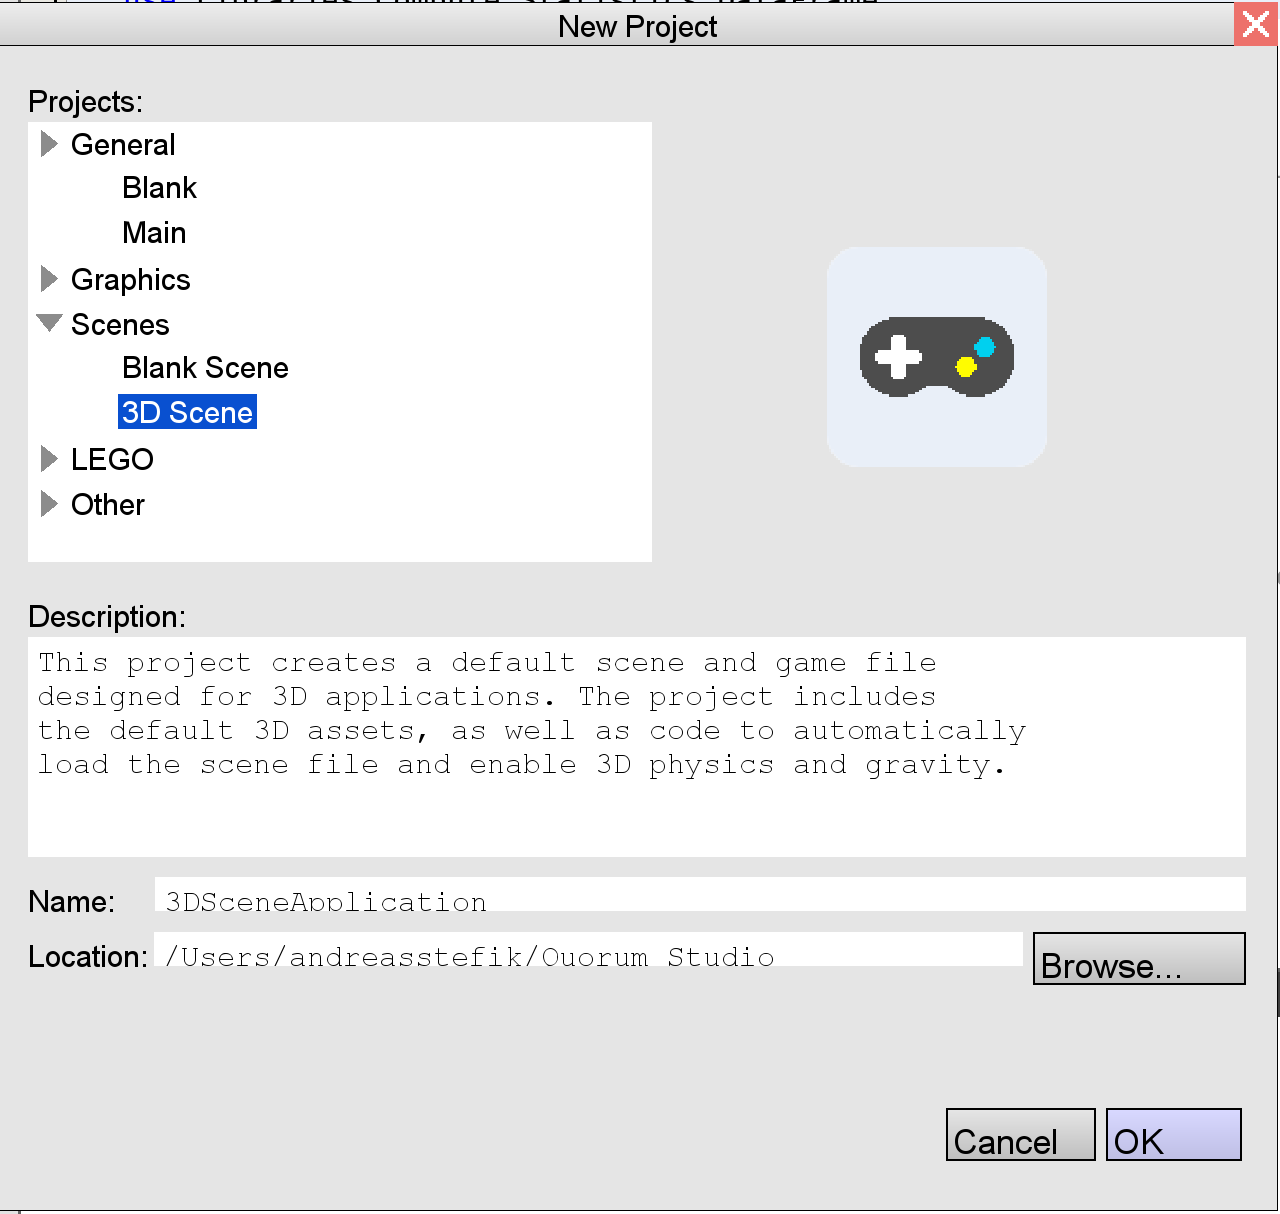 This image is the new project window. It contains a tree of possible new projects, such as a blank project, various kinds of graphical projects, and others. This highlights Scenes -> 3D Scene project. 
            Below is a description of the type of project selected, then a Name blank, save location line, Browse Button, Cancel Button, and Ok Button.